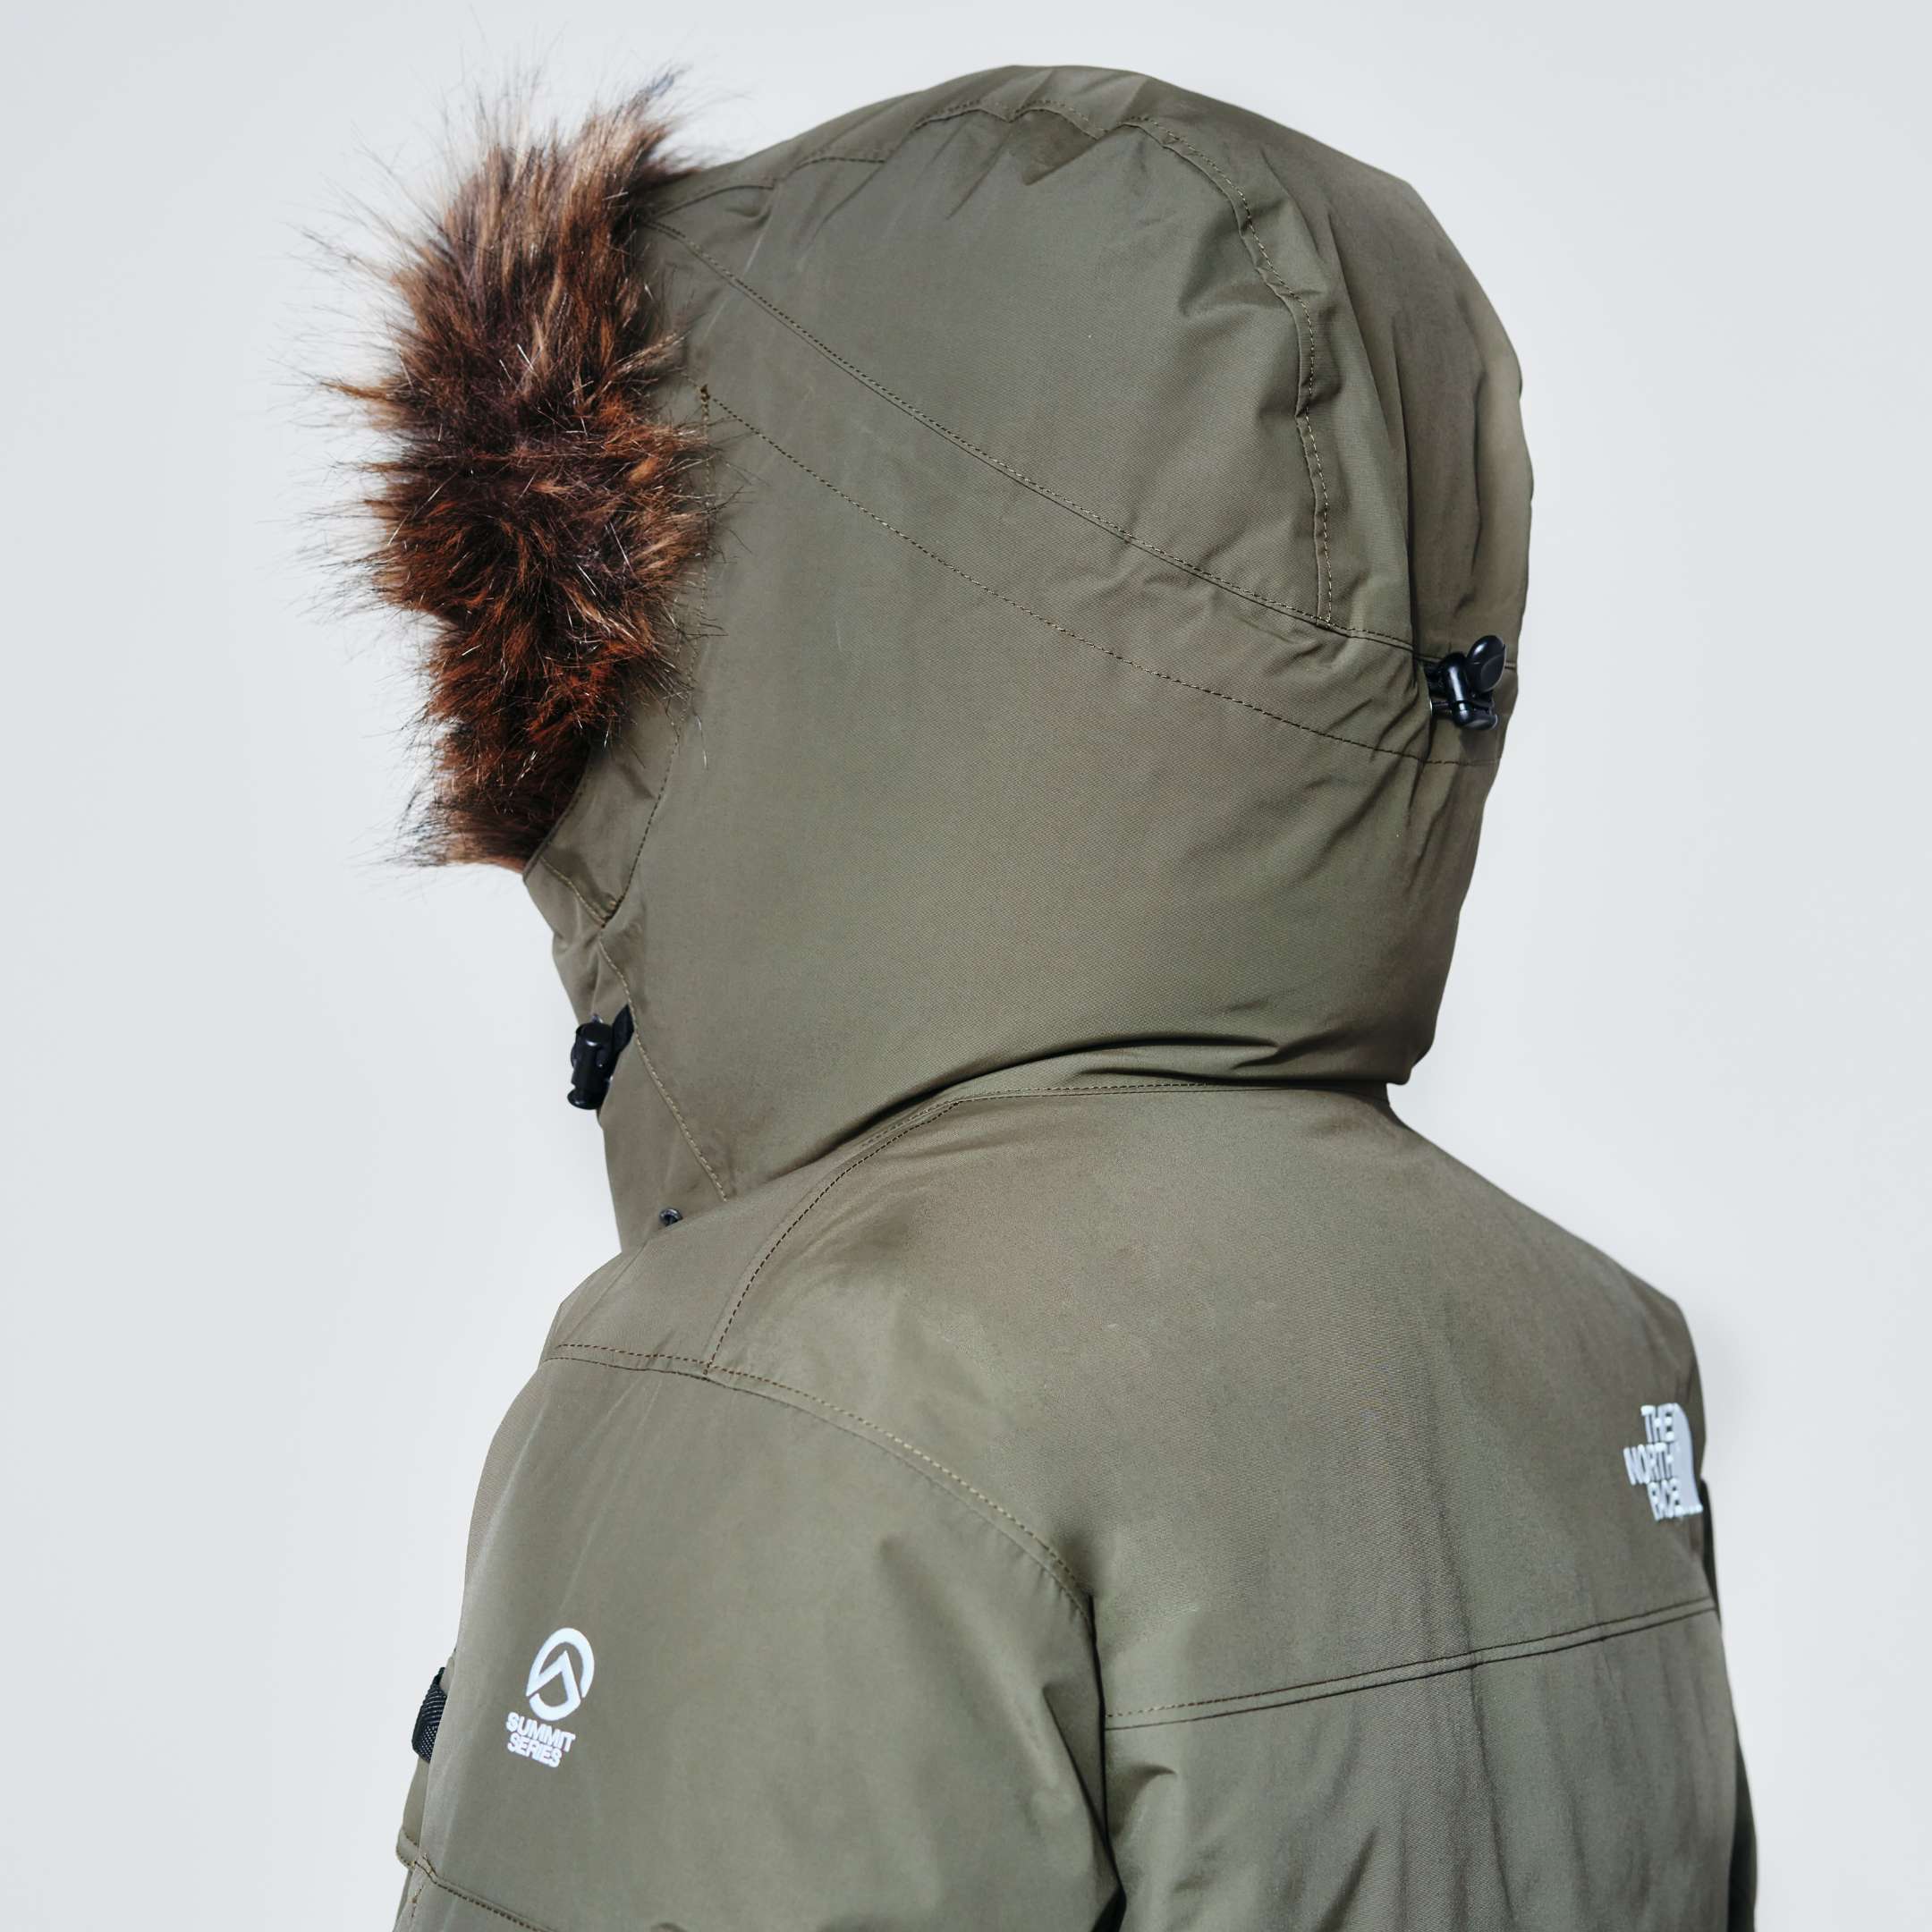 SOUTHERN CROSS PARKA (ND92120 / UNISEX) - THE NORTH FACE MOUNTAIN